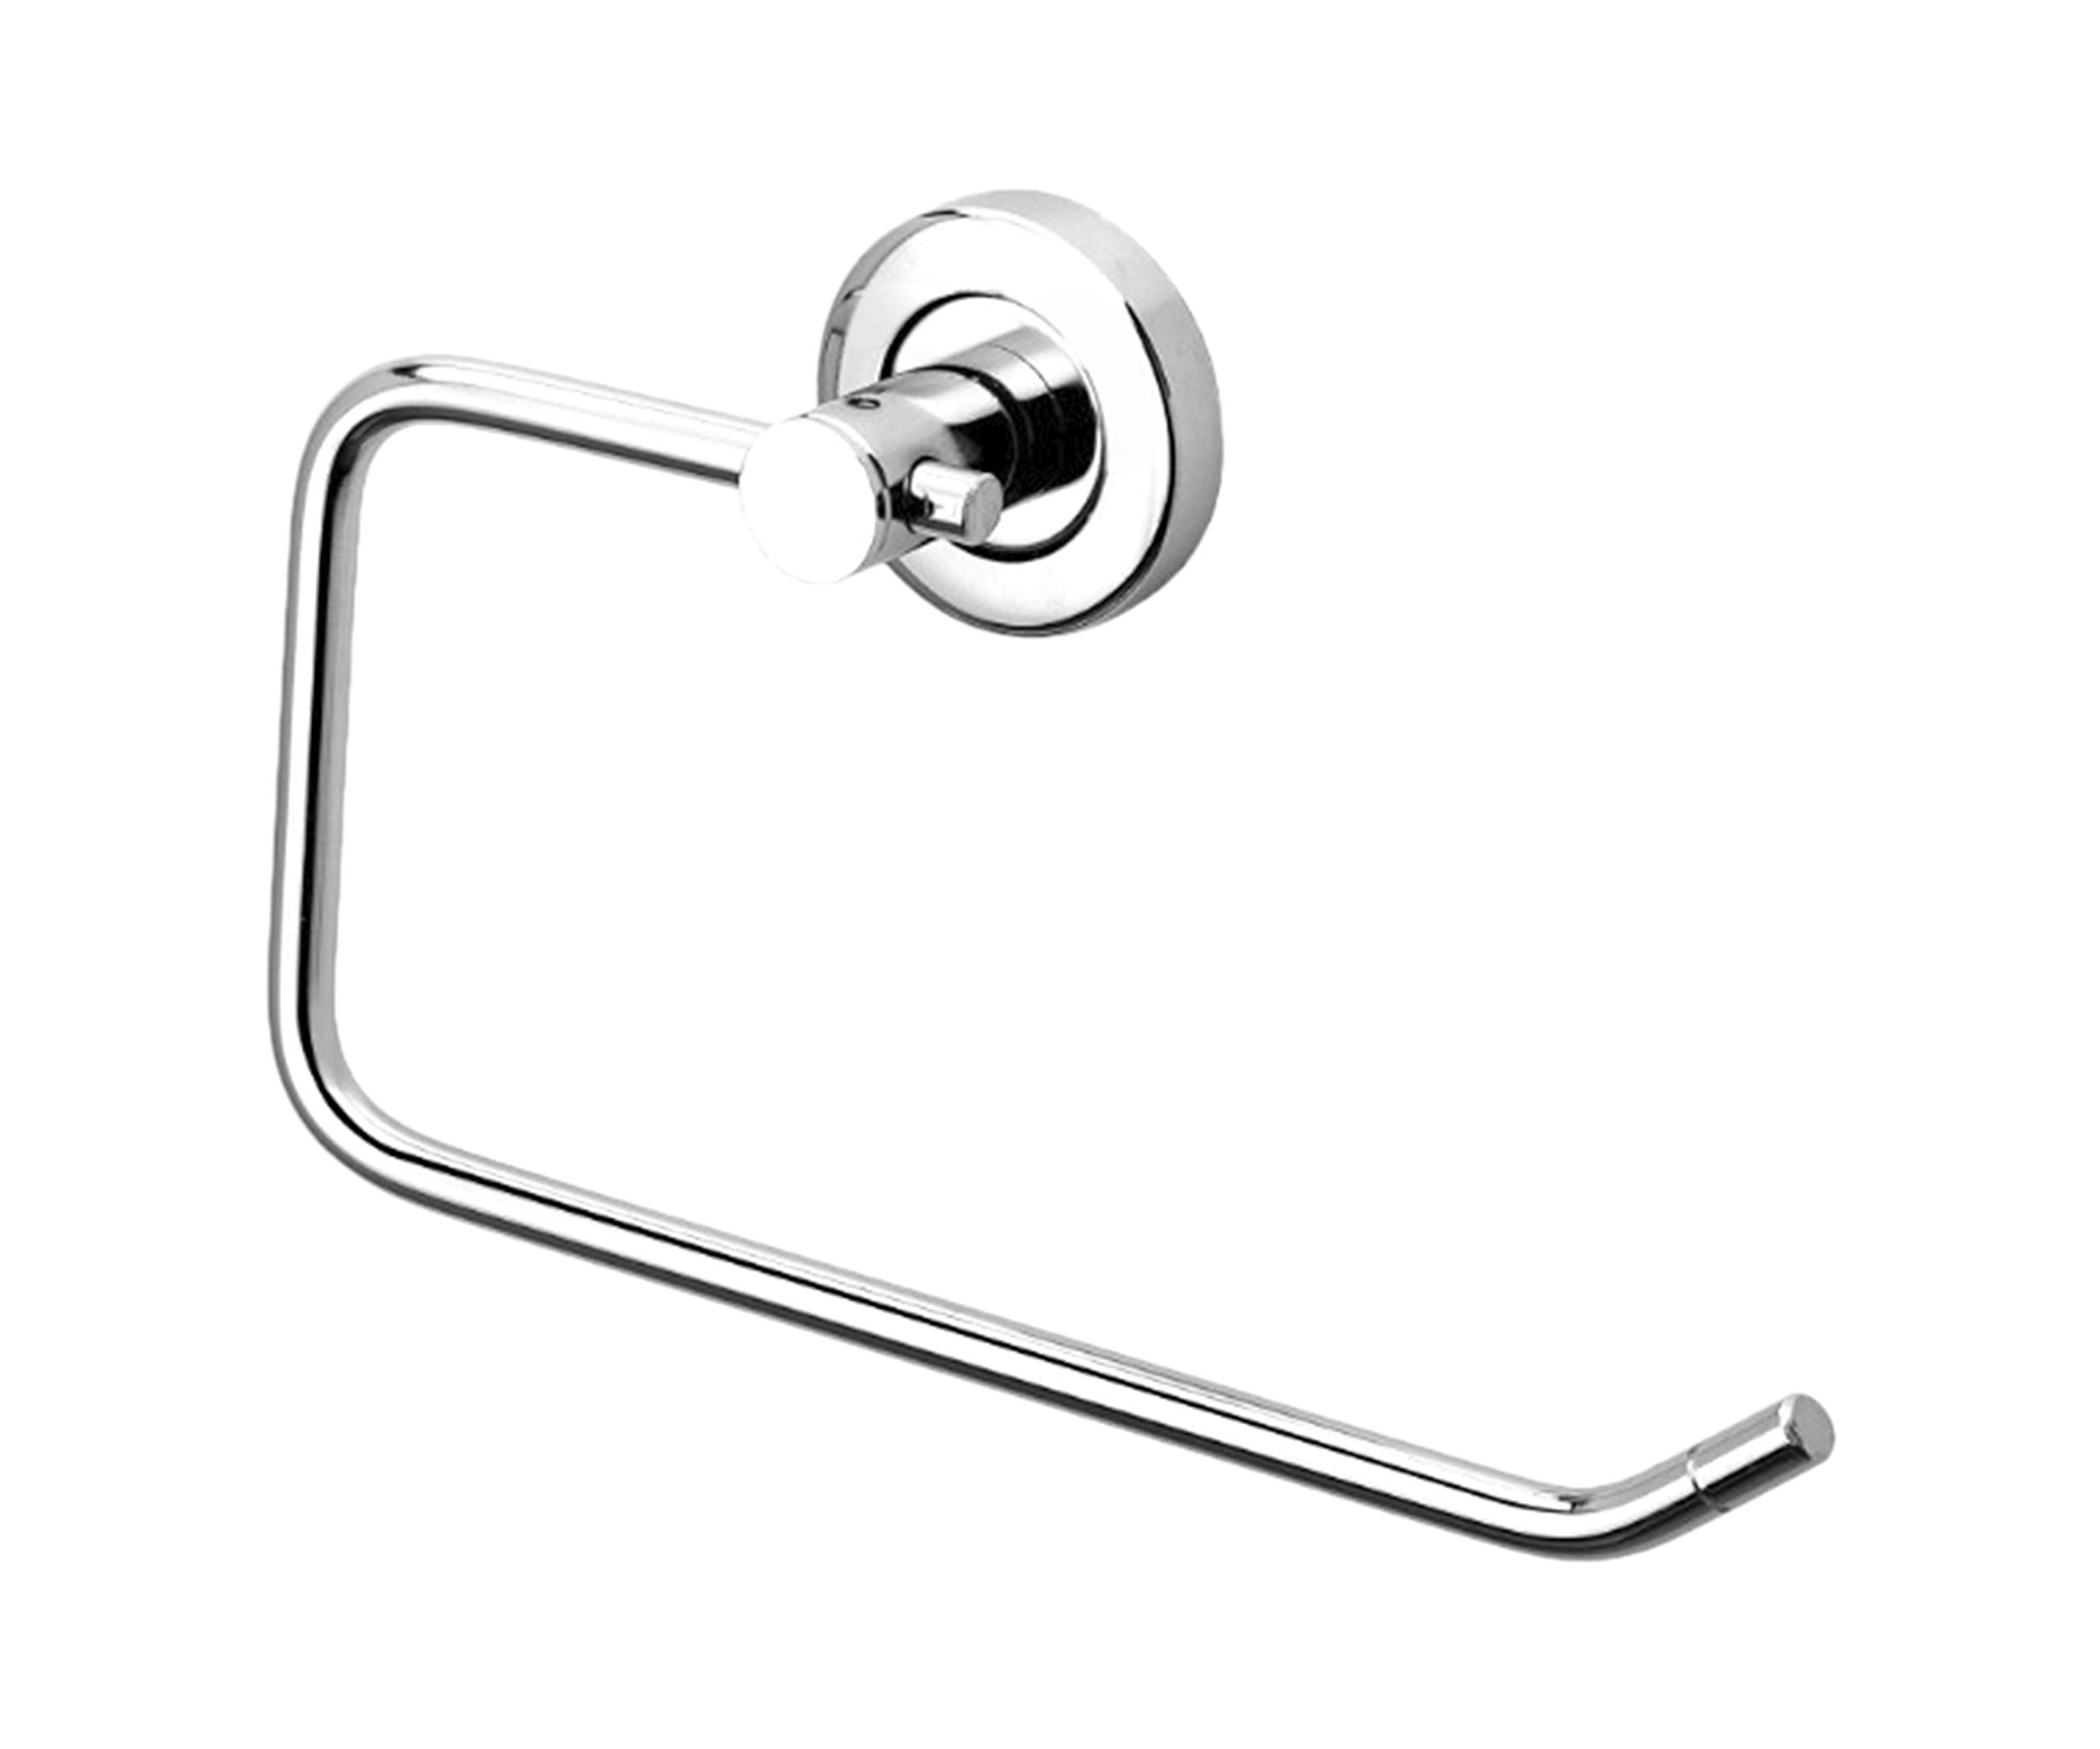 Plantex Stainless Steel Towel Ring for Bathroom/Wash Basin/Napkin-Towel Hanger/Bathroom Accessories (Chrome-Half Square) - Pack of 4